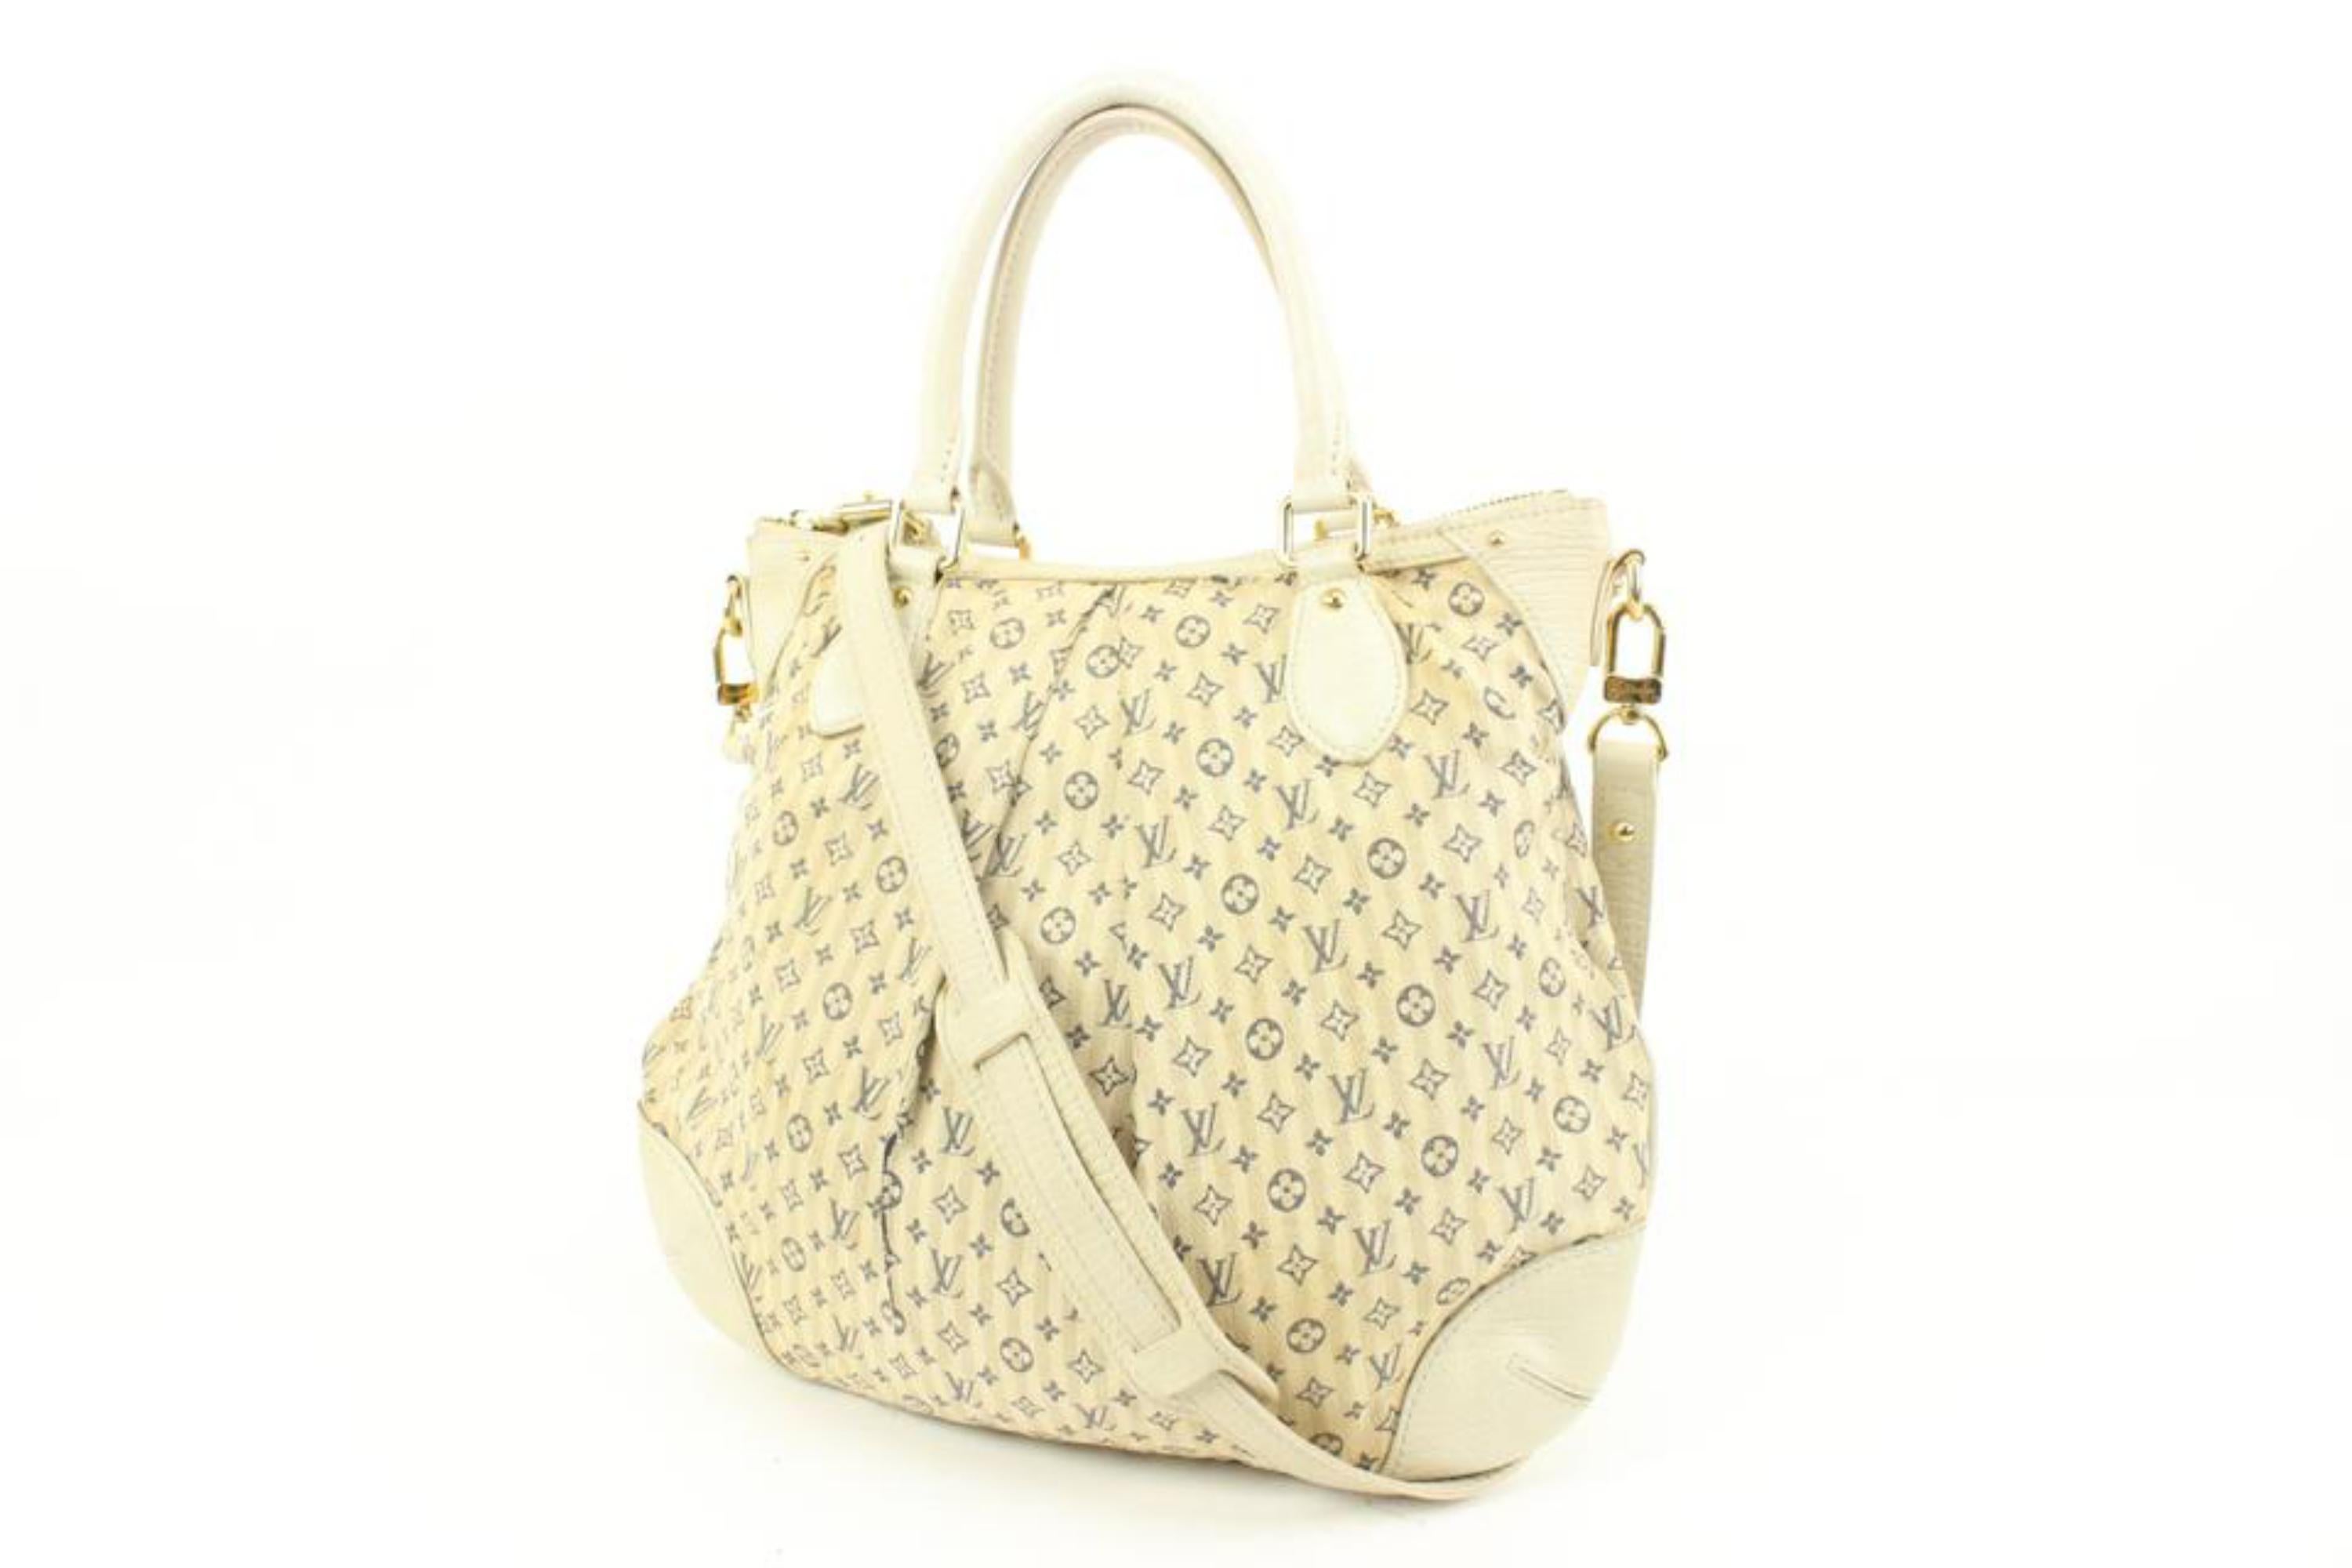 Louis Vuitton Navy x Ivory Monogram Mini Lin Croisette Marina PM 2way Hobo 3lz425s
Date Code/Serial Number: SR4057
Made In: France
Measurements: Length:  14